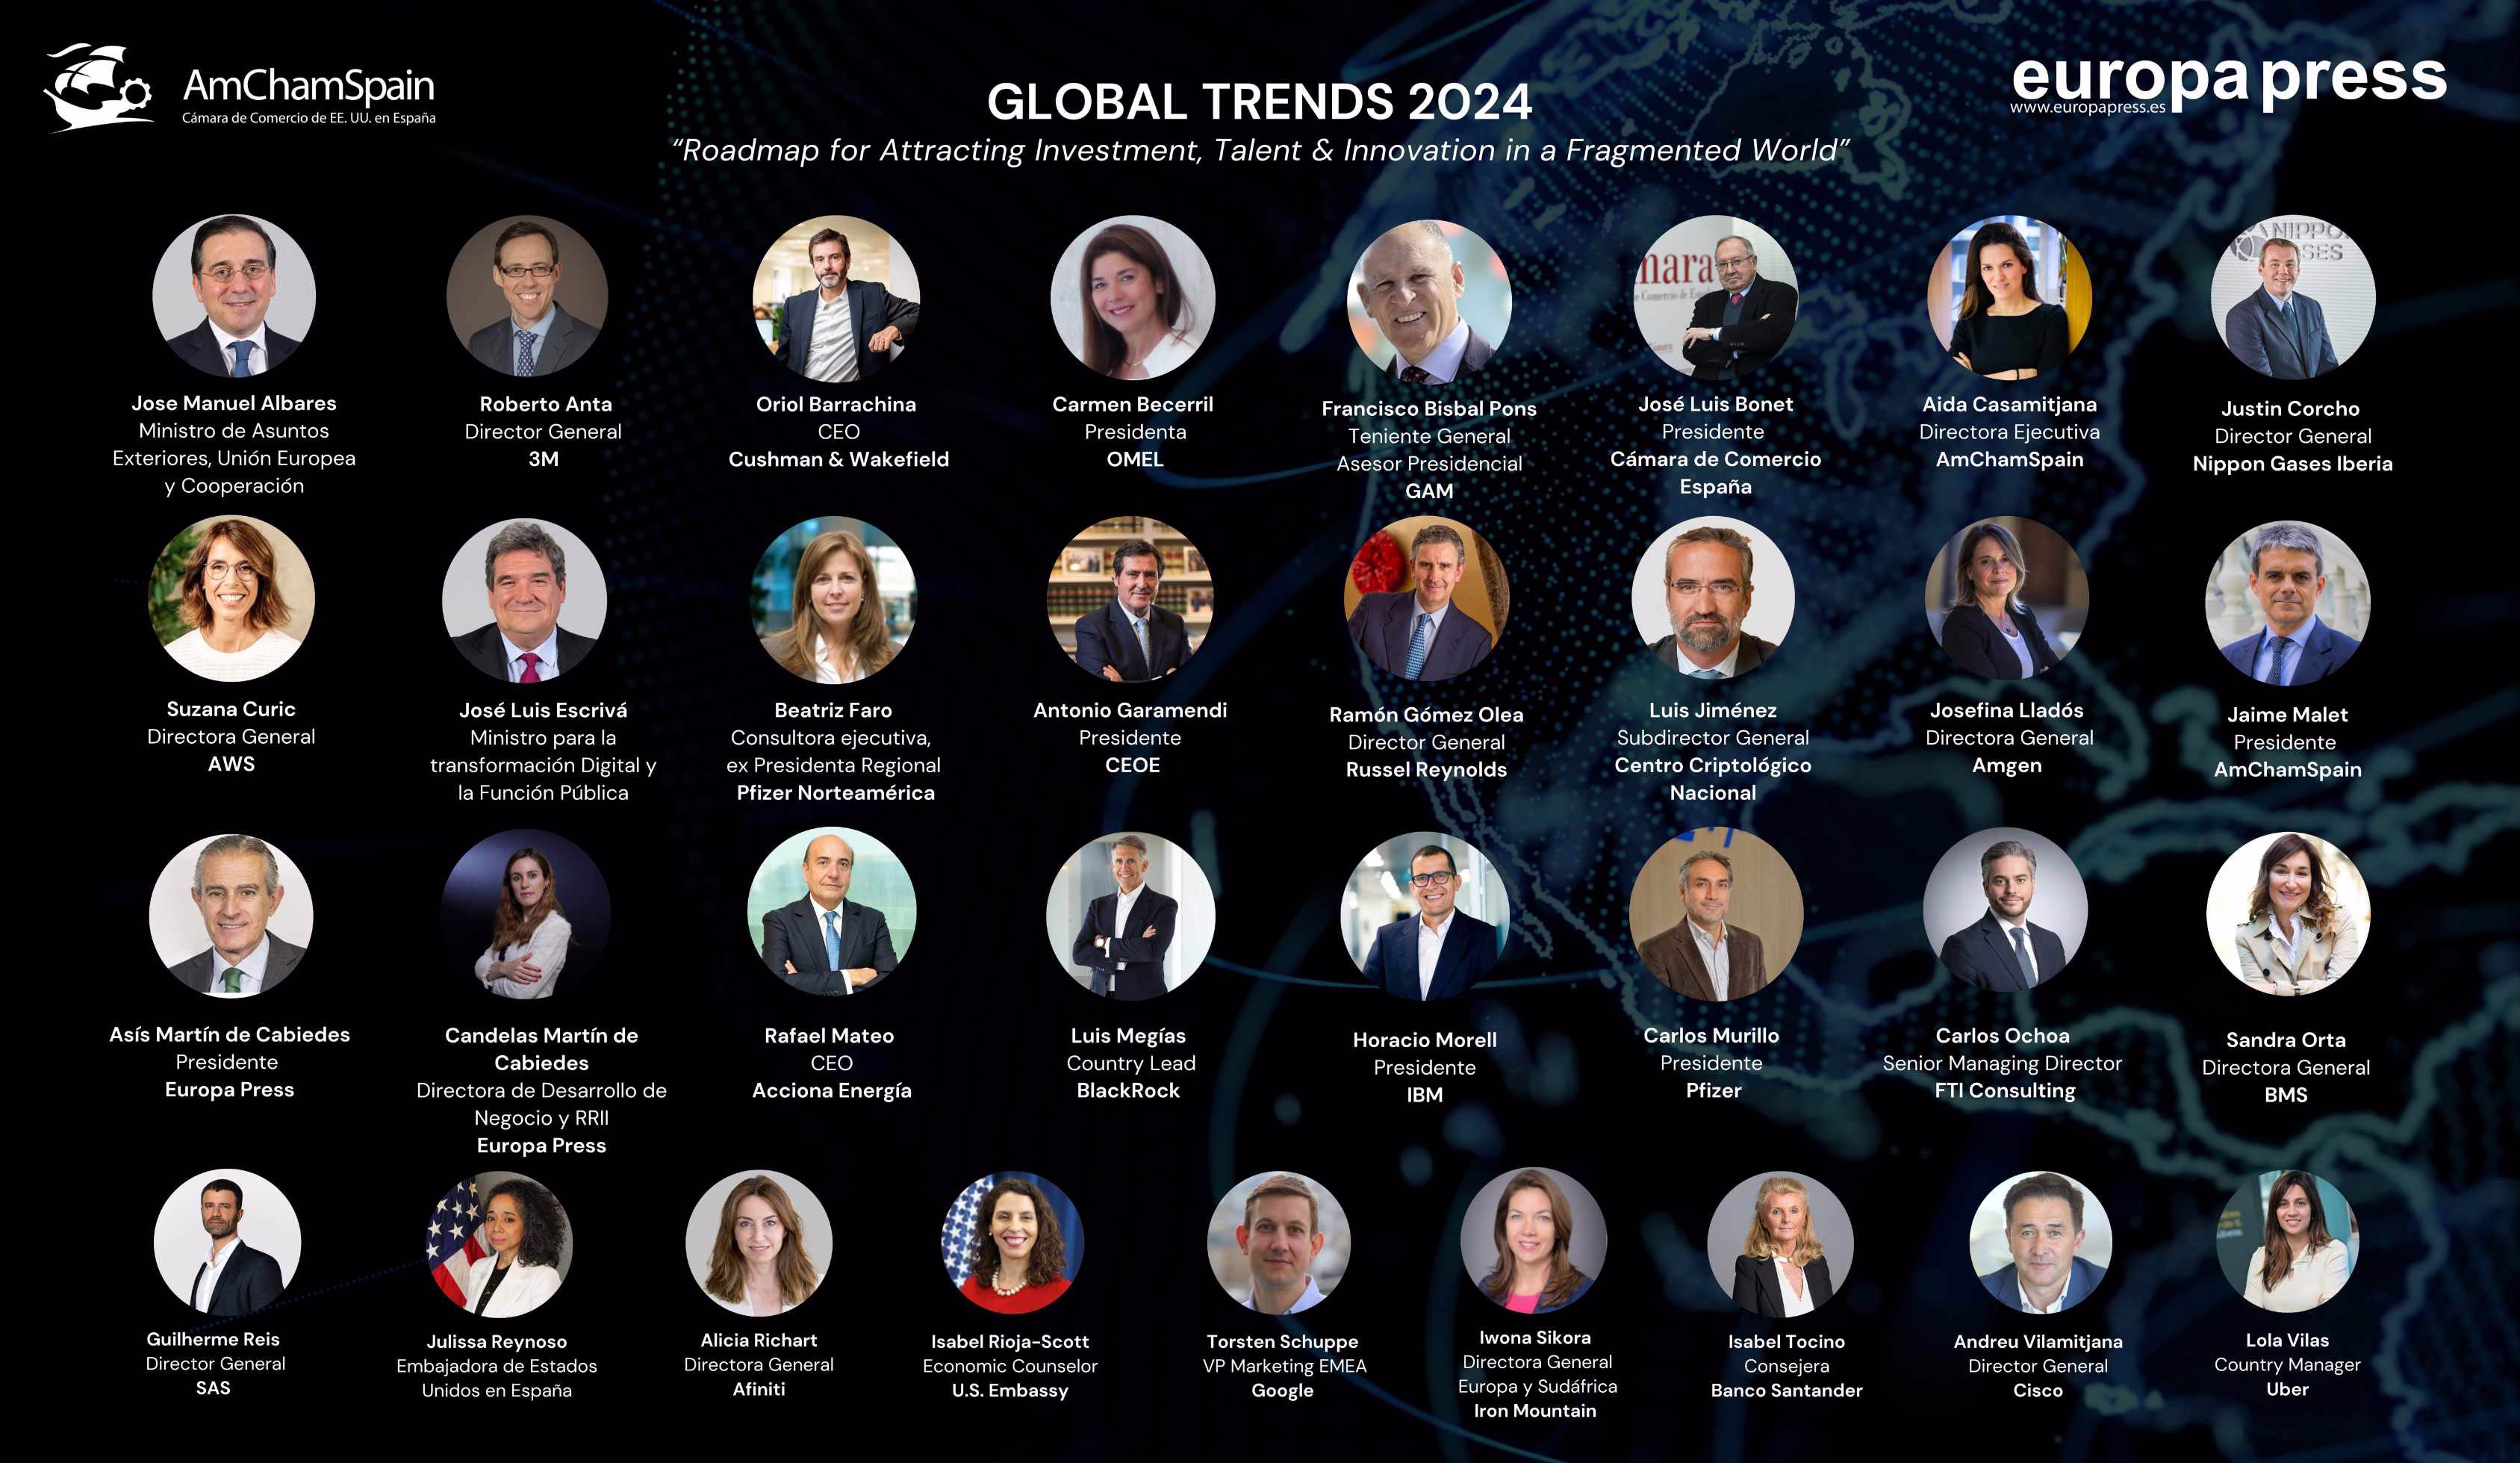 GLOBAL TRENDS 2024 "Roadmap for Attracting Investment, Talent & Innovation in a Fragmented World"